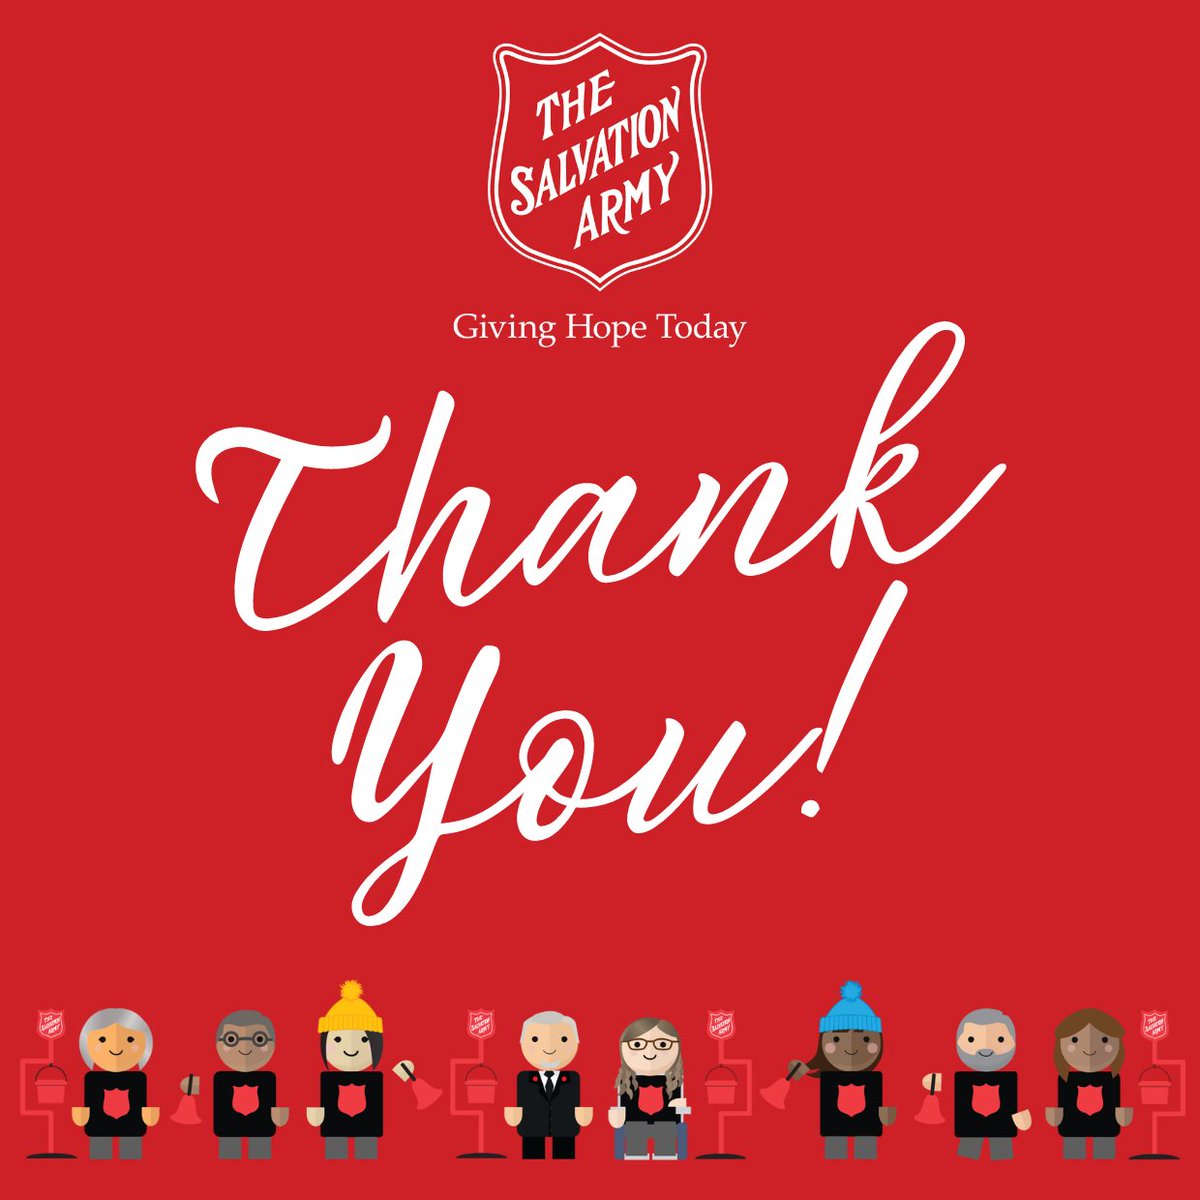 Thank you to everyone who participated in The Salvation Army Edmonton Christmas Kettle Campaign this year.
Your support helped raise over $497,000 for the programs and services that The Salvation Army provides in our Edmonton community.

@tsaedmonton
#GivingHopeToday